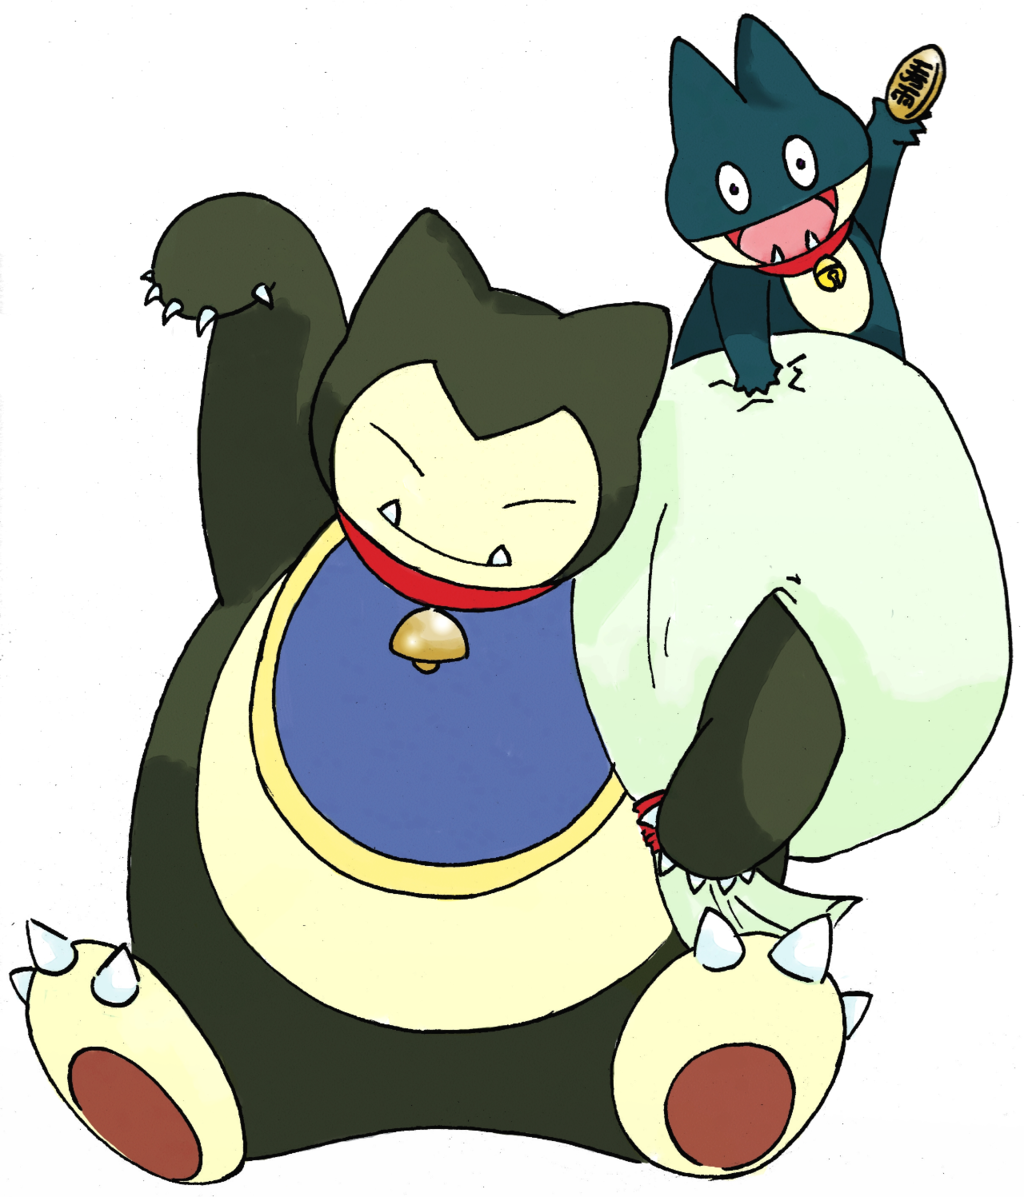 Snorlax with his buddy Munchlax!